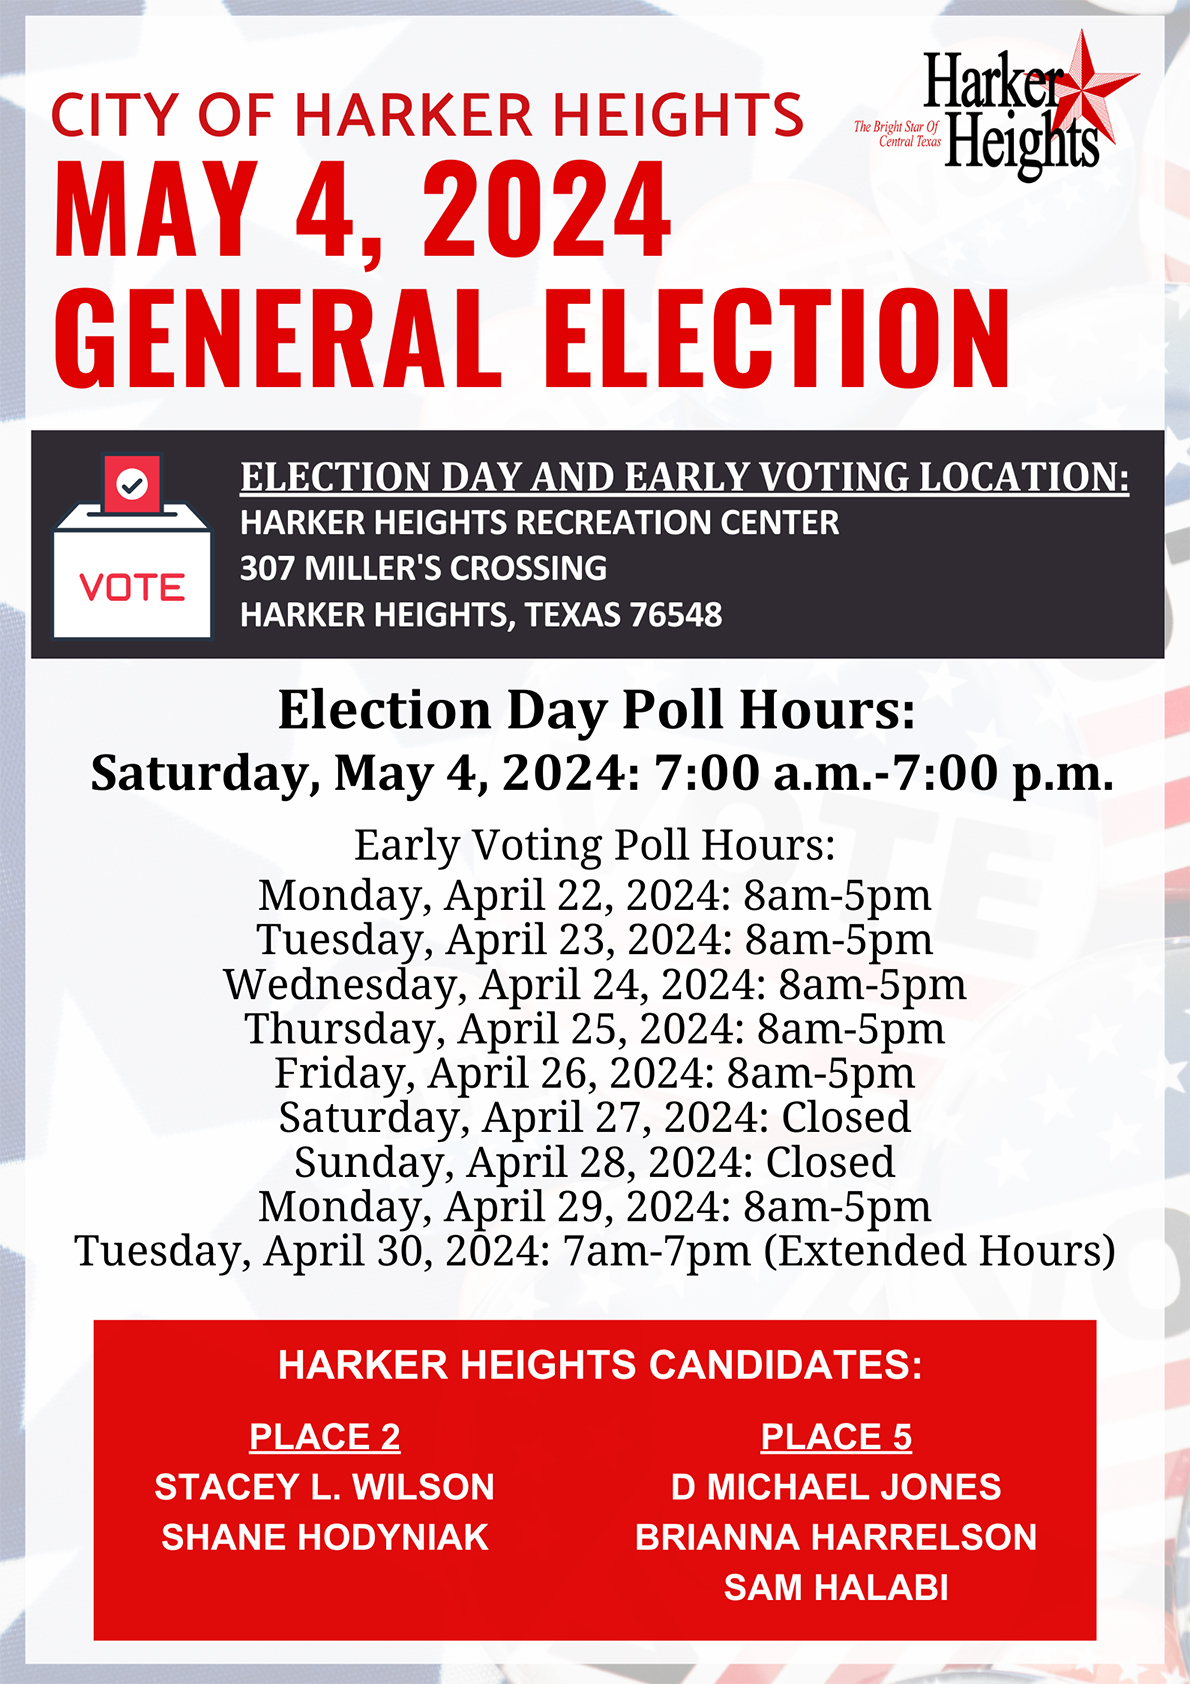 City of Harker Heights May 4, 2024 General Election